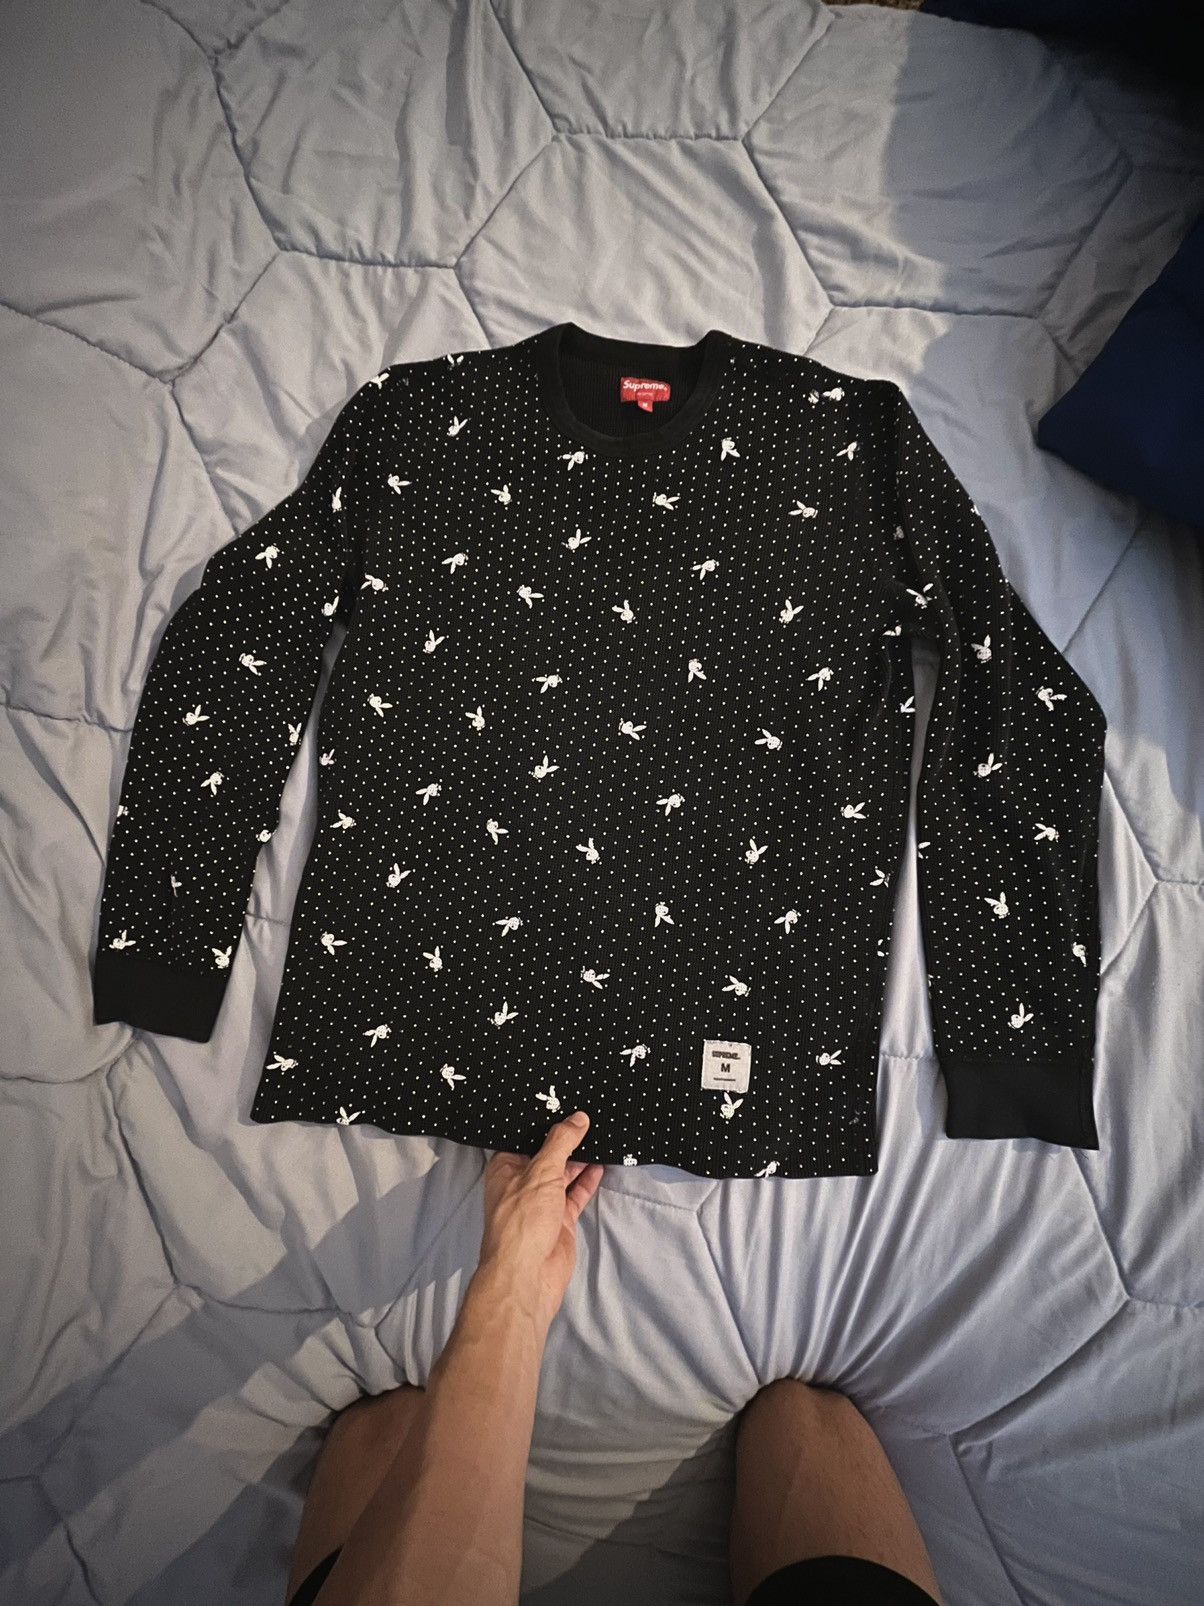 Supreme Supreme/Playboy patterned waffle thermal | Grailed